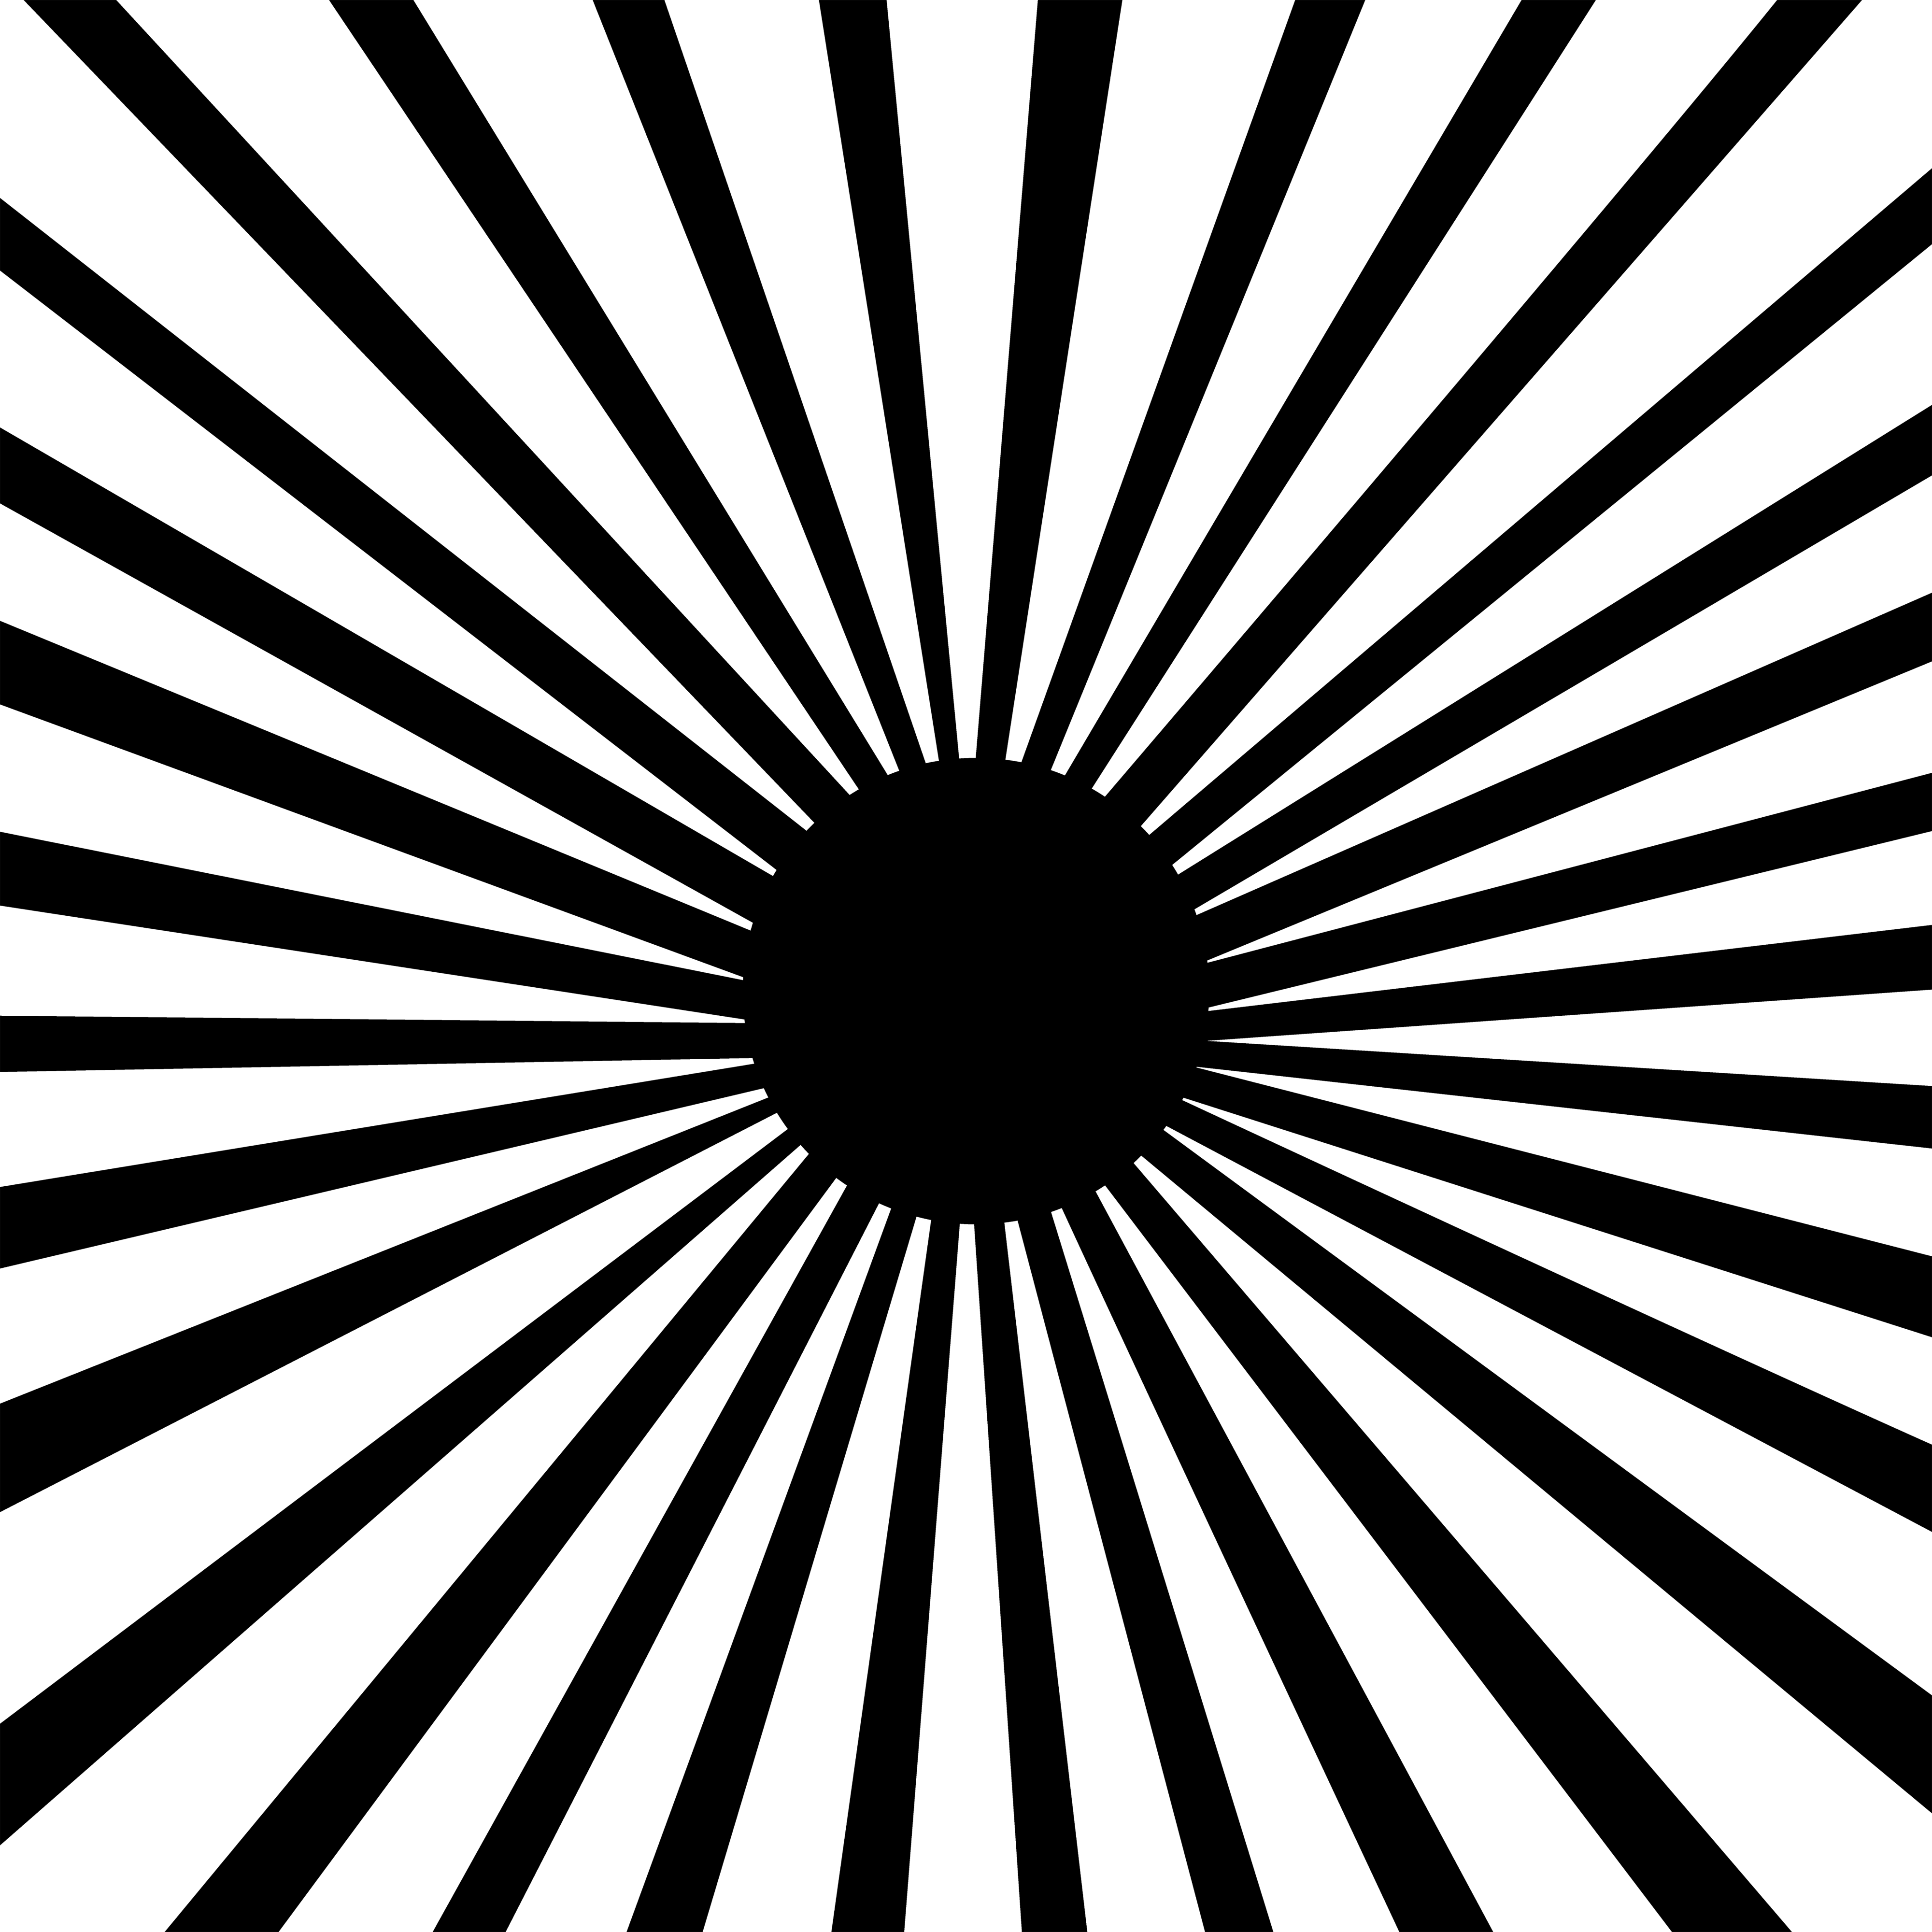 17 Black And White Line Designs Images